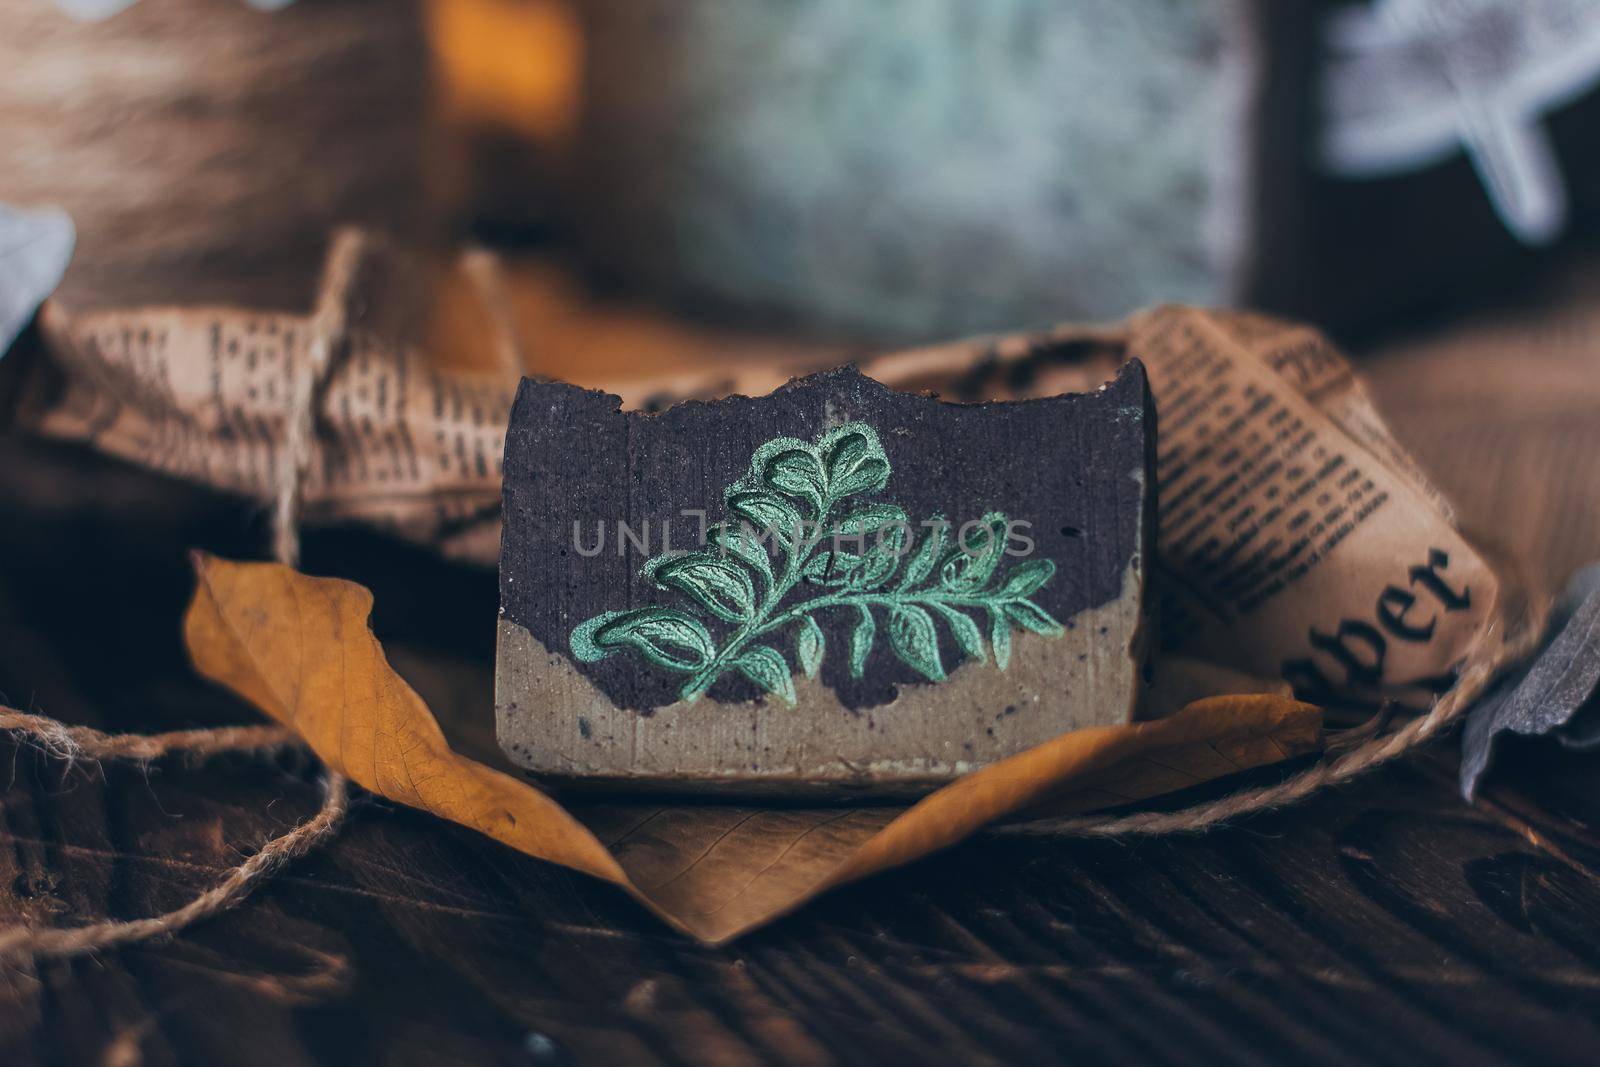 Pieces of beautiful natural handcrafted soap on wooden background with botanical elements, close up view. For relax, health, spa and aromatherapy. Lifestyle.